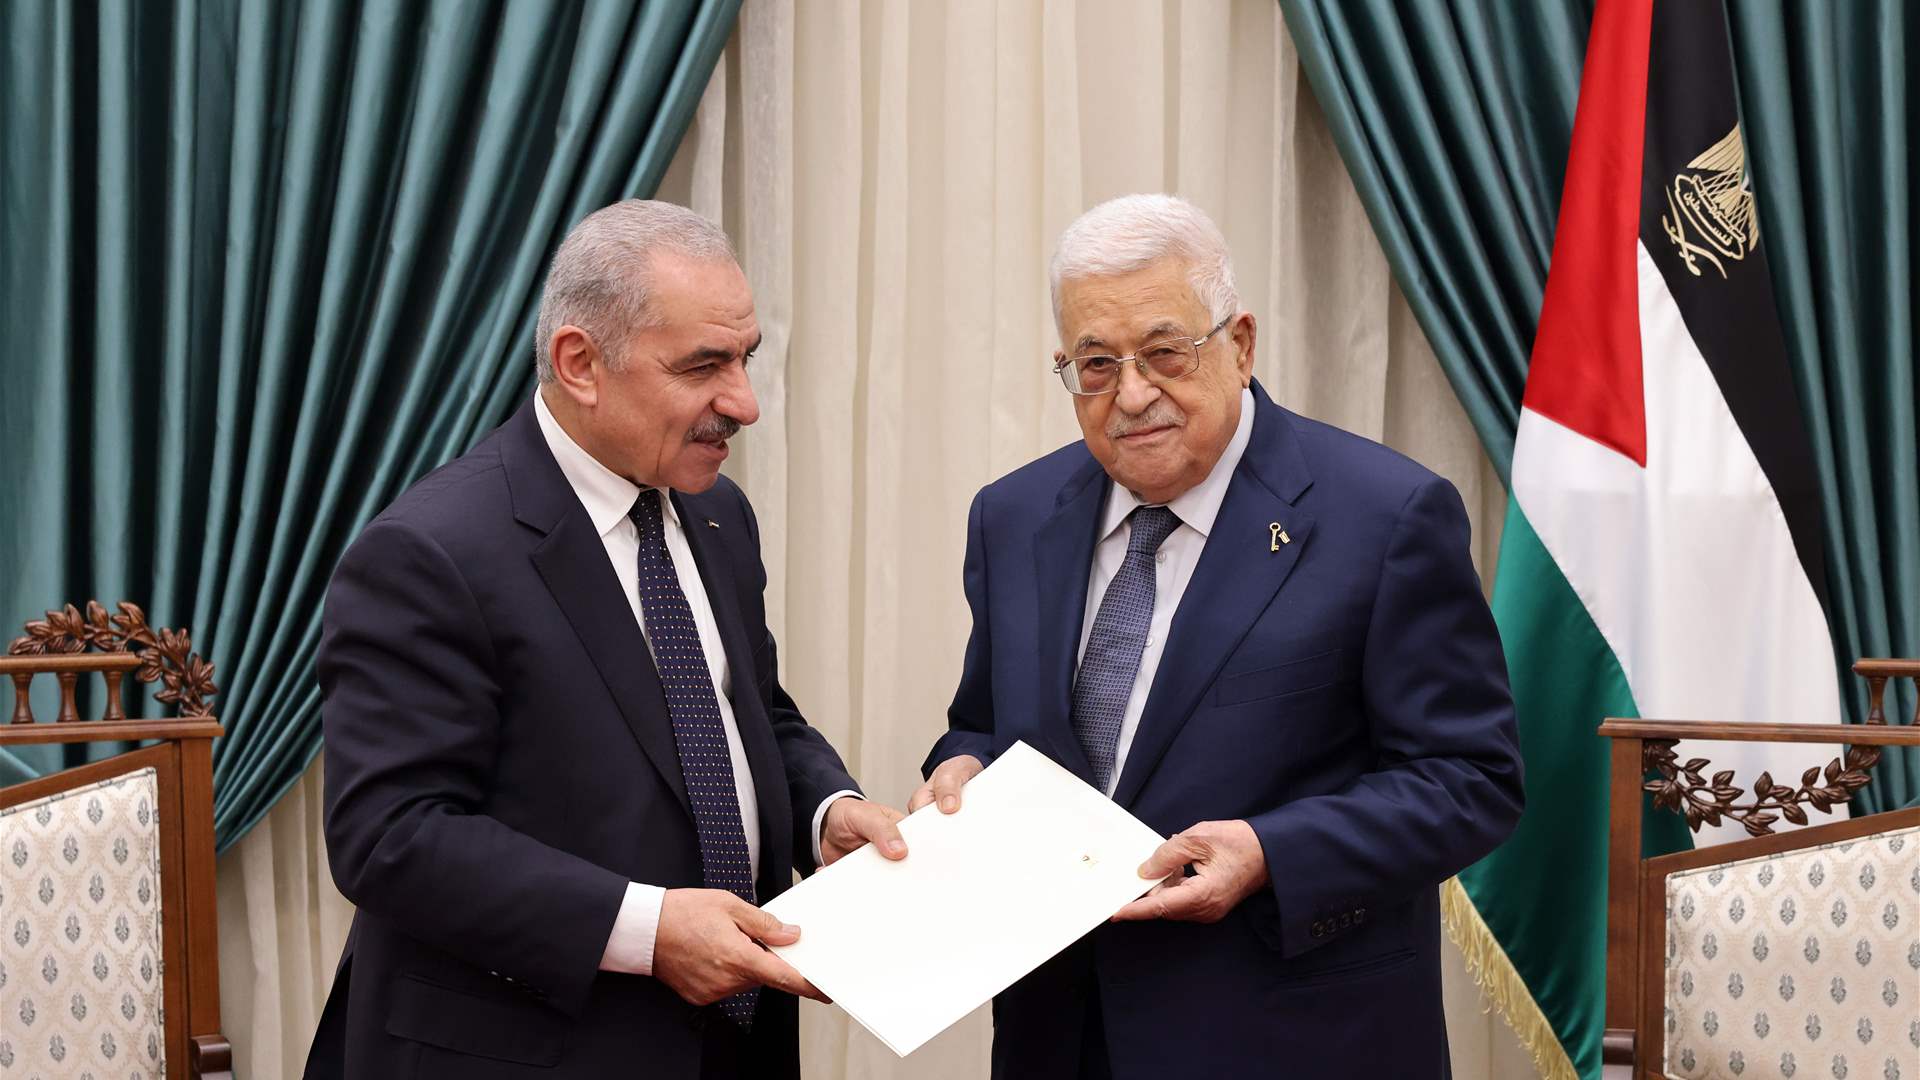 Mahmoud Abbas accepts the resignation of the Shtayyeh government